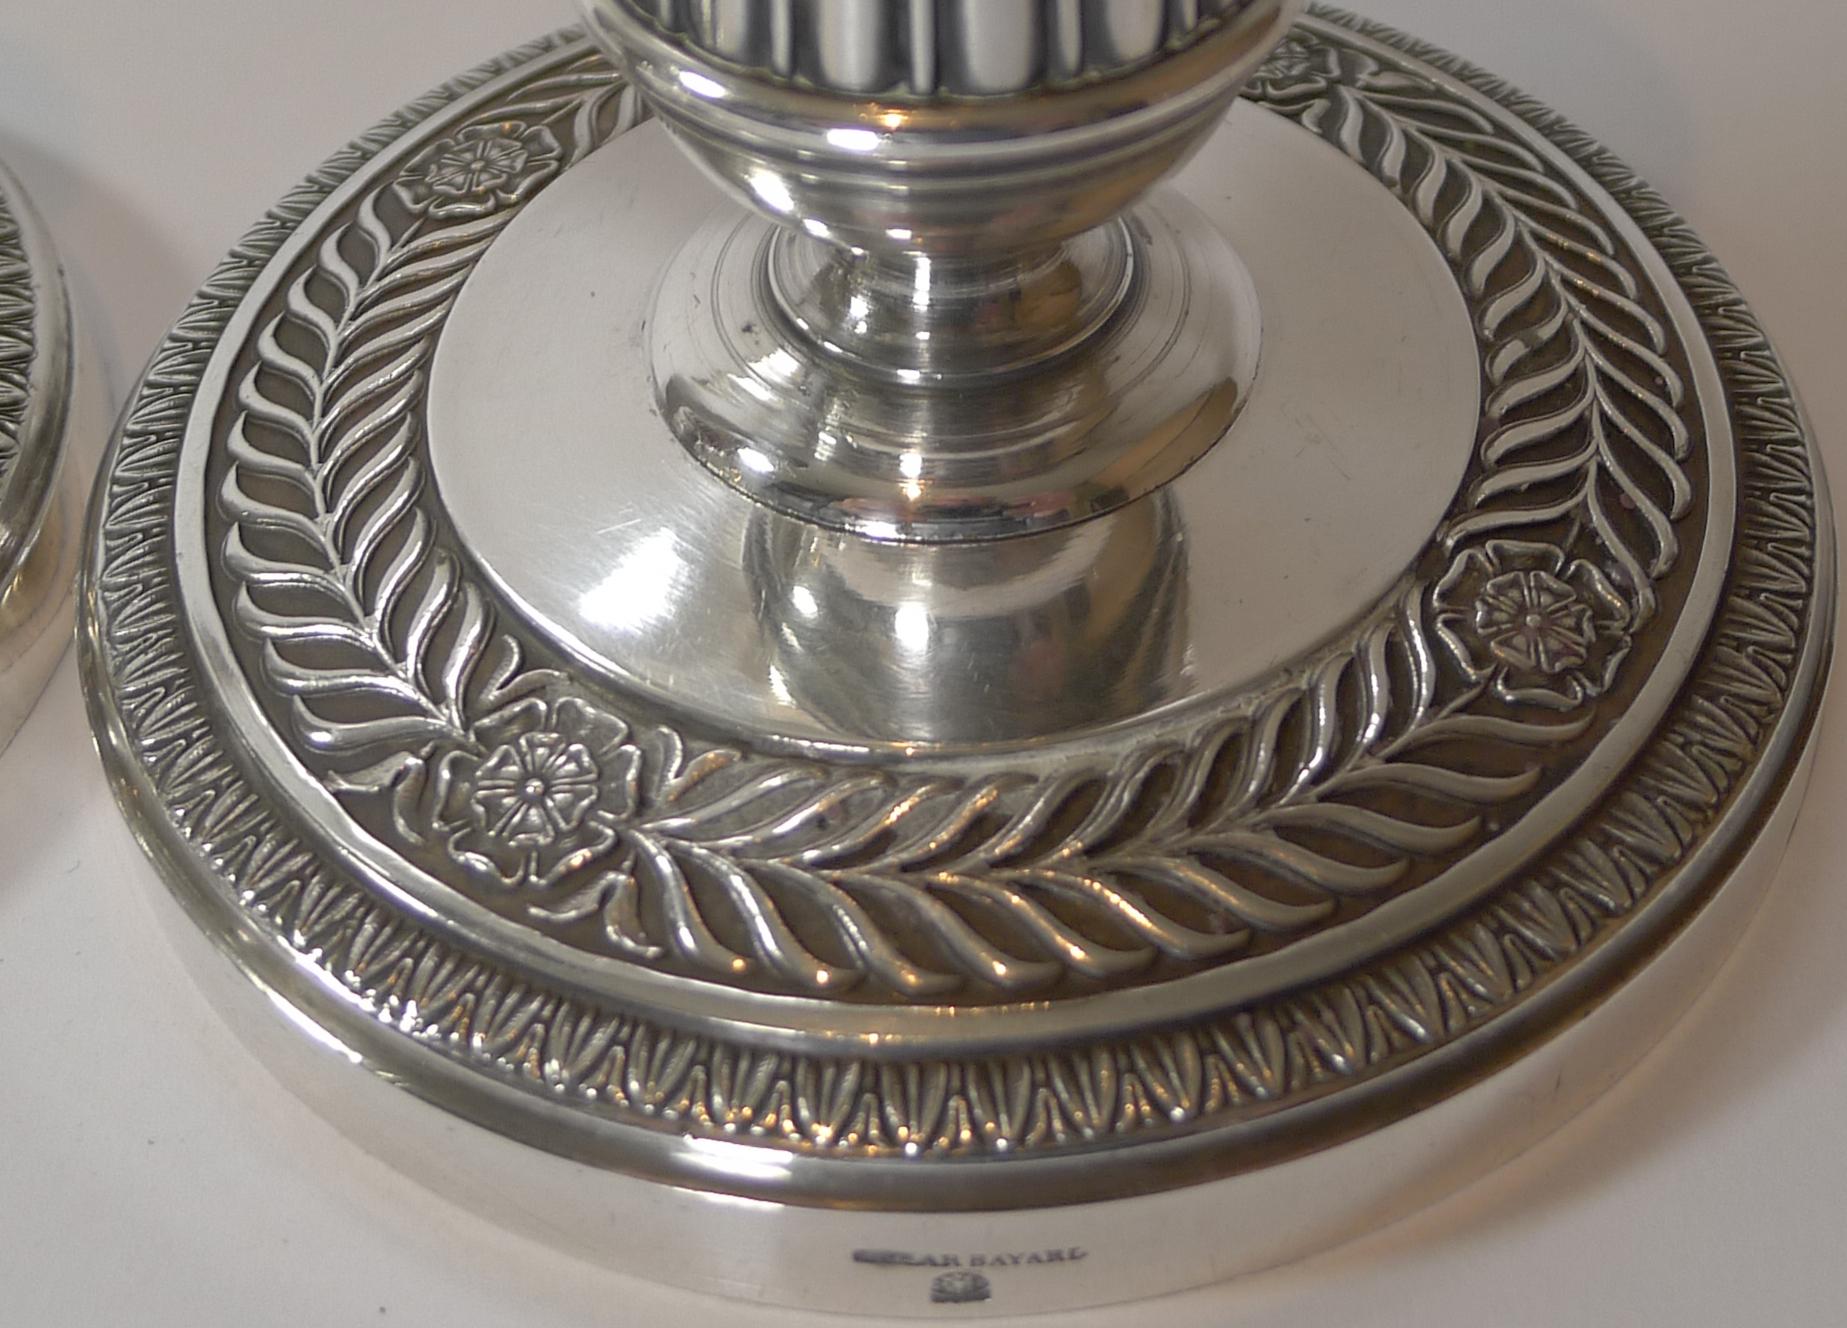 Late Victorian Top Quality Pair French Silver Plated Candlesticks by Cailar Bayard, c.1900